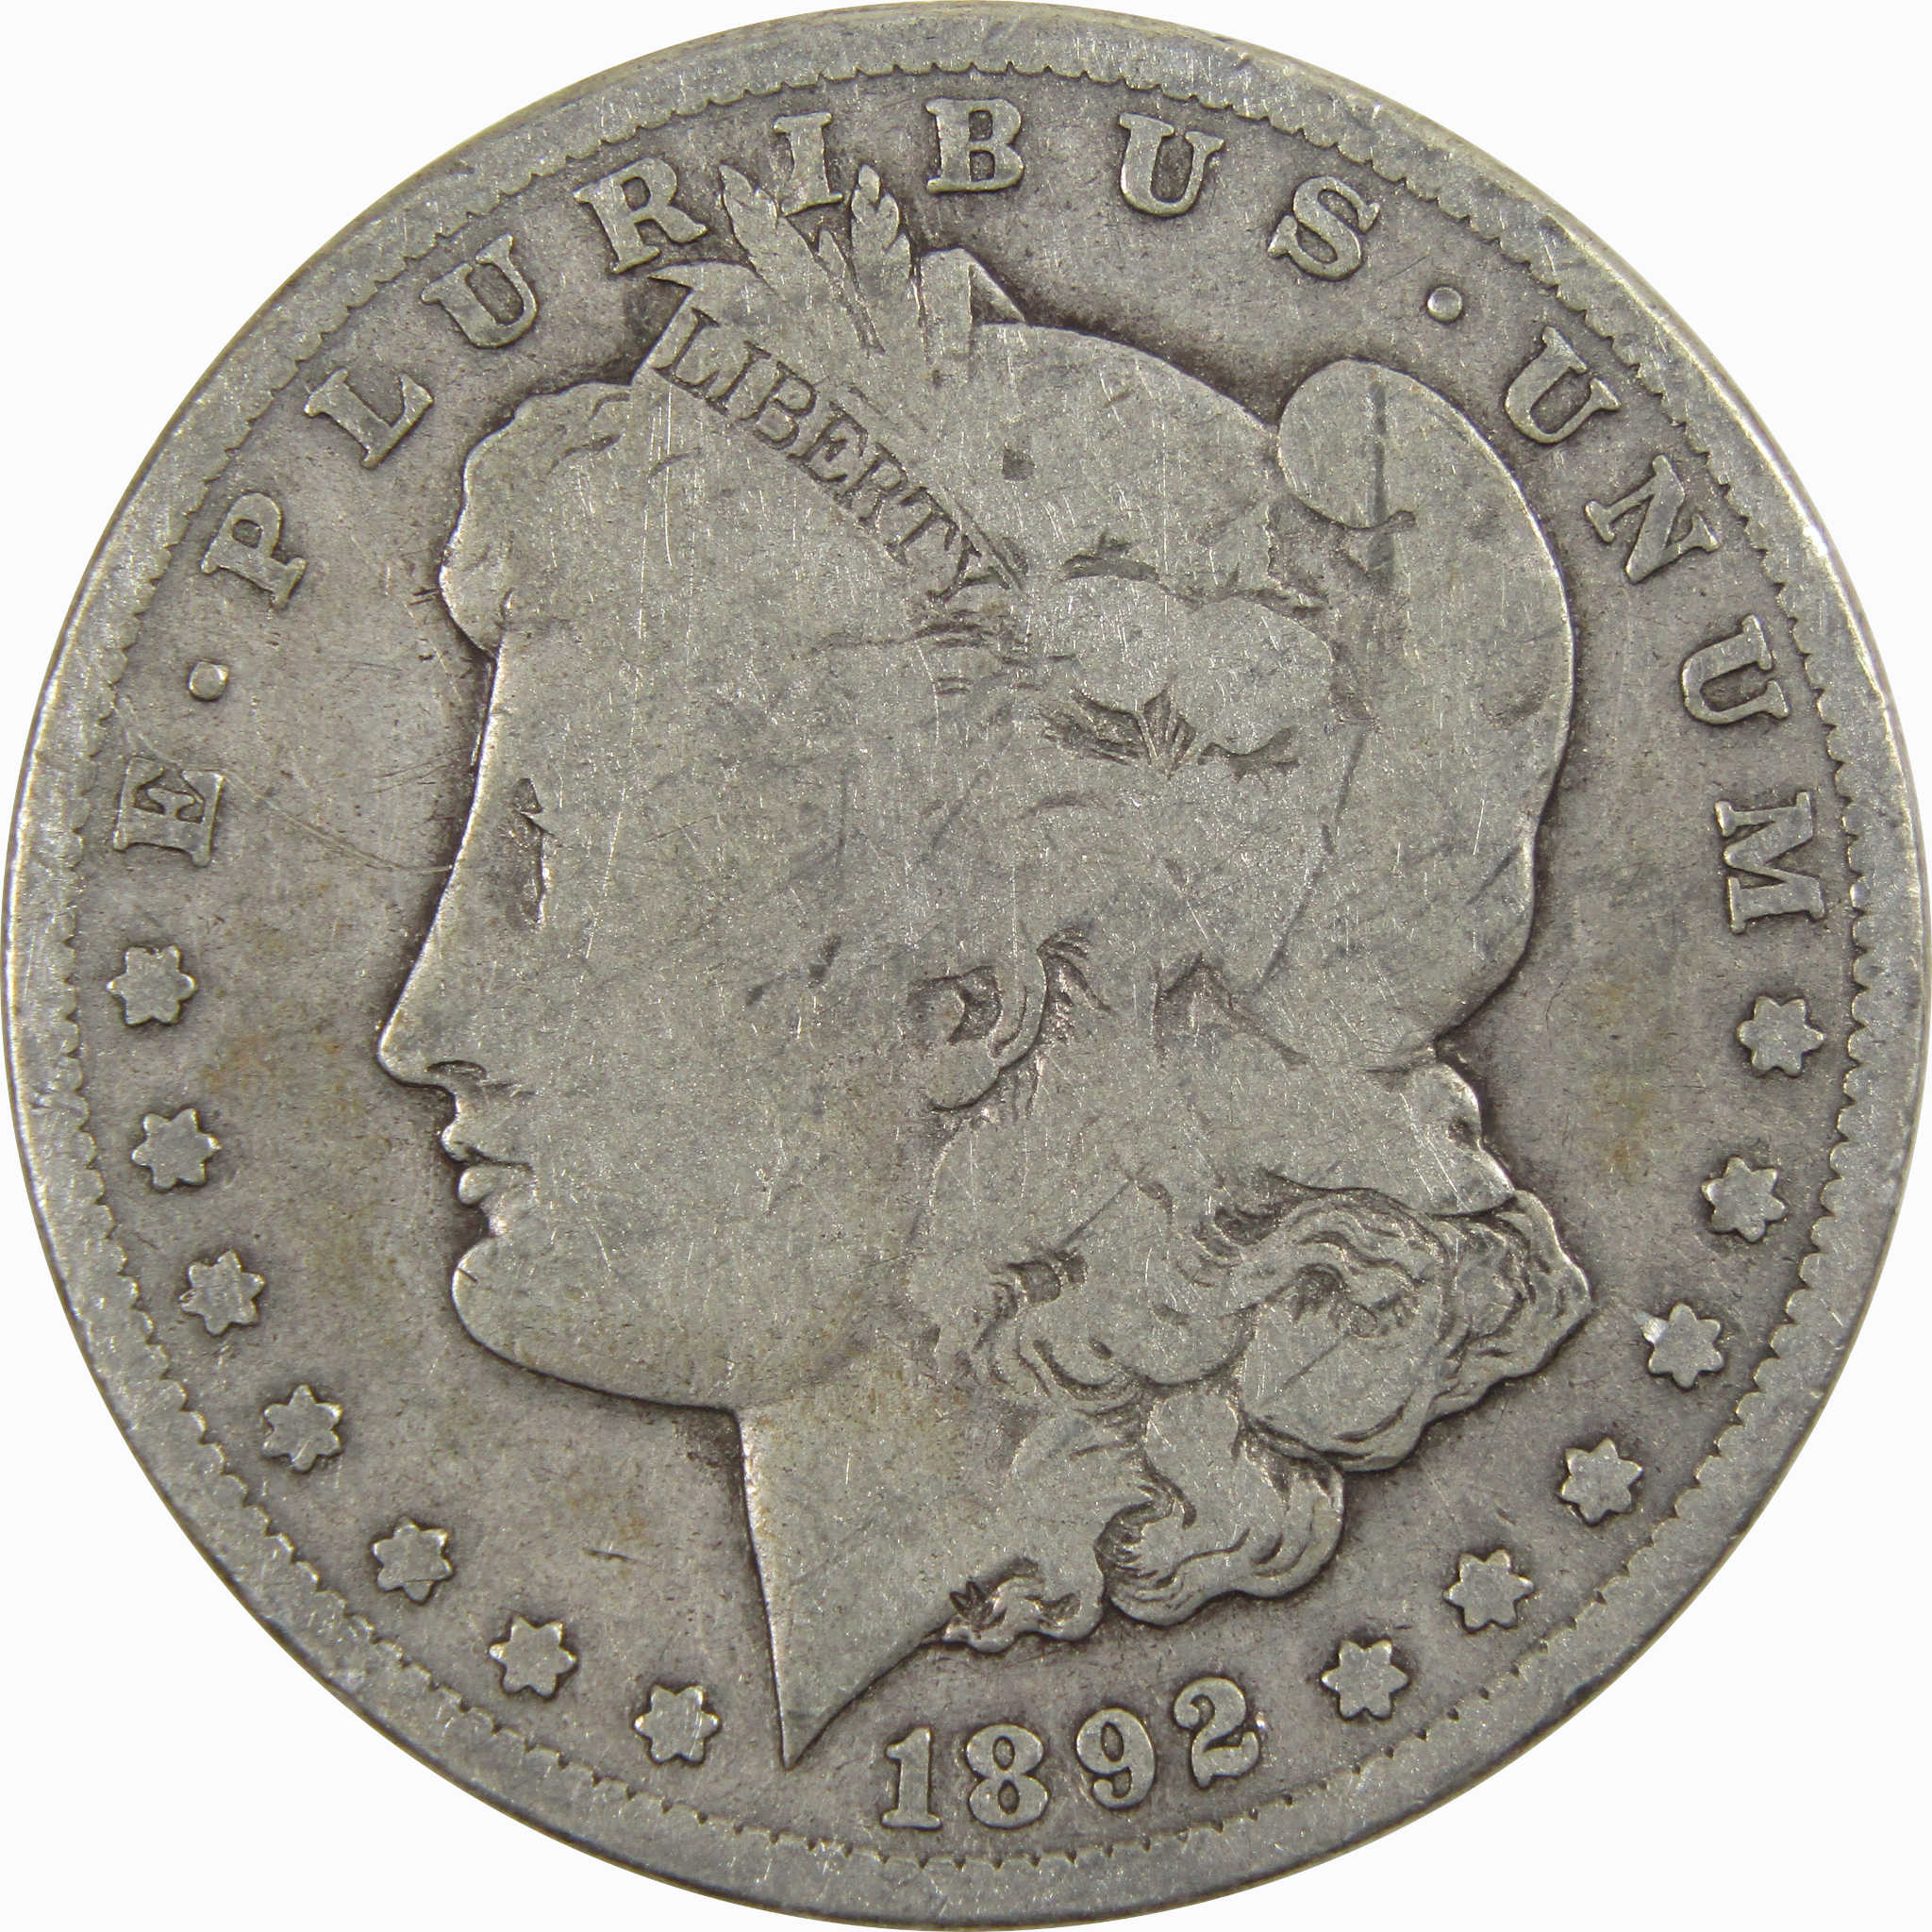 1892 S Morgan Dollar G Good Details 90% Silver $1 US Coin SKU:I3971 - Morgan coin - Morgan silver dollar - Morgan silver dollar for sale - Profile Coins &amp; Collectibles